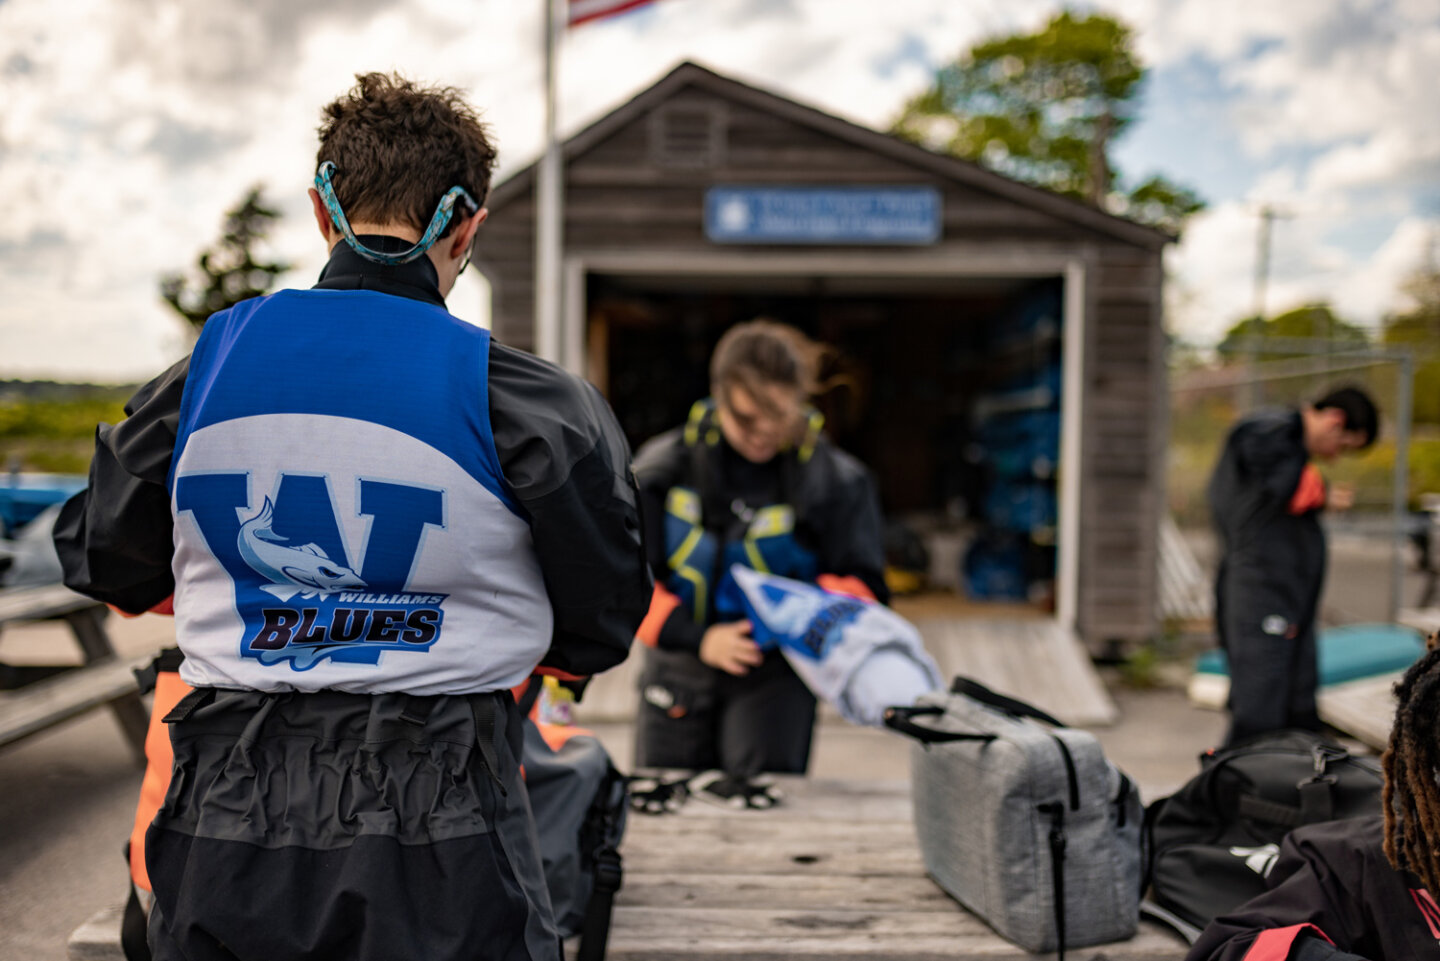 Williams sailing students put their water gear on at the marina